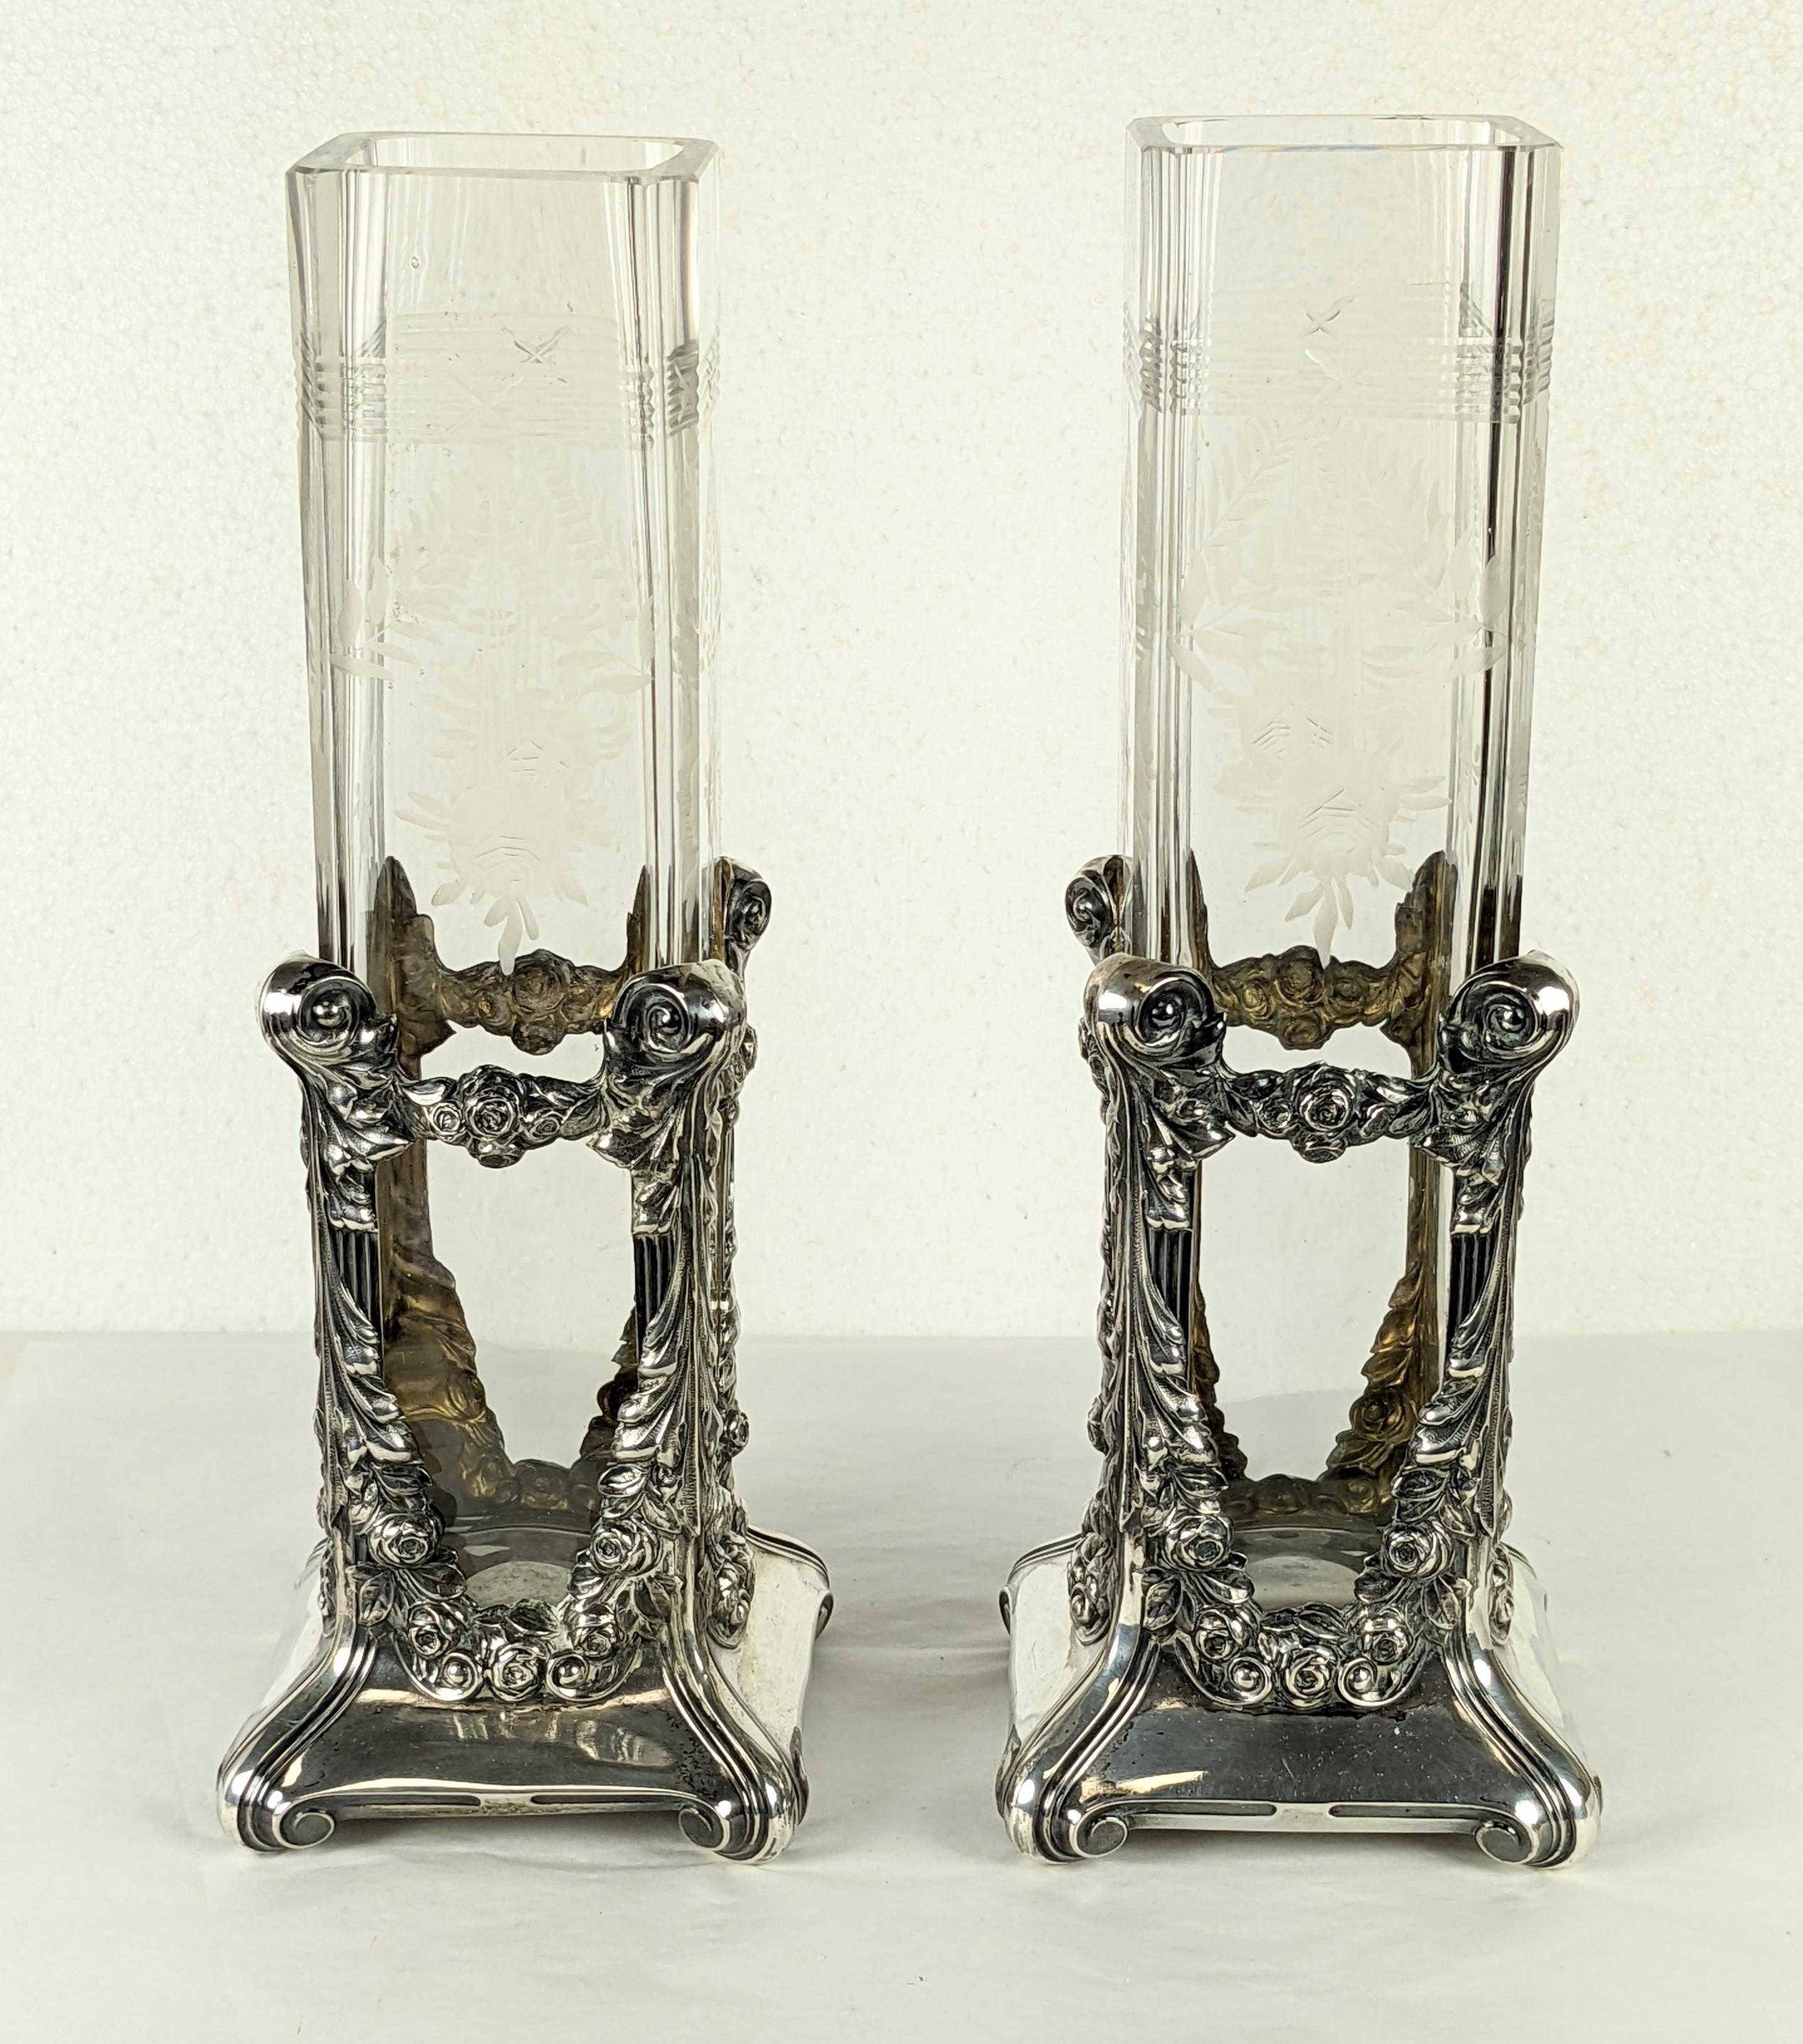 Pair of late lovely 19th century sterling vases with glass liners. Beautifully repousse work with floral swags and scrolls. Liner has etched glass detailing of leaf garlands with roses as well to match the motifs on the silver.
Liners measure 2.5